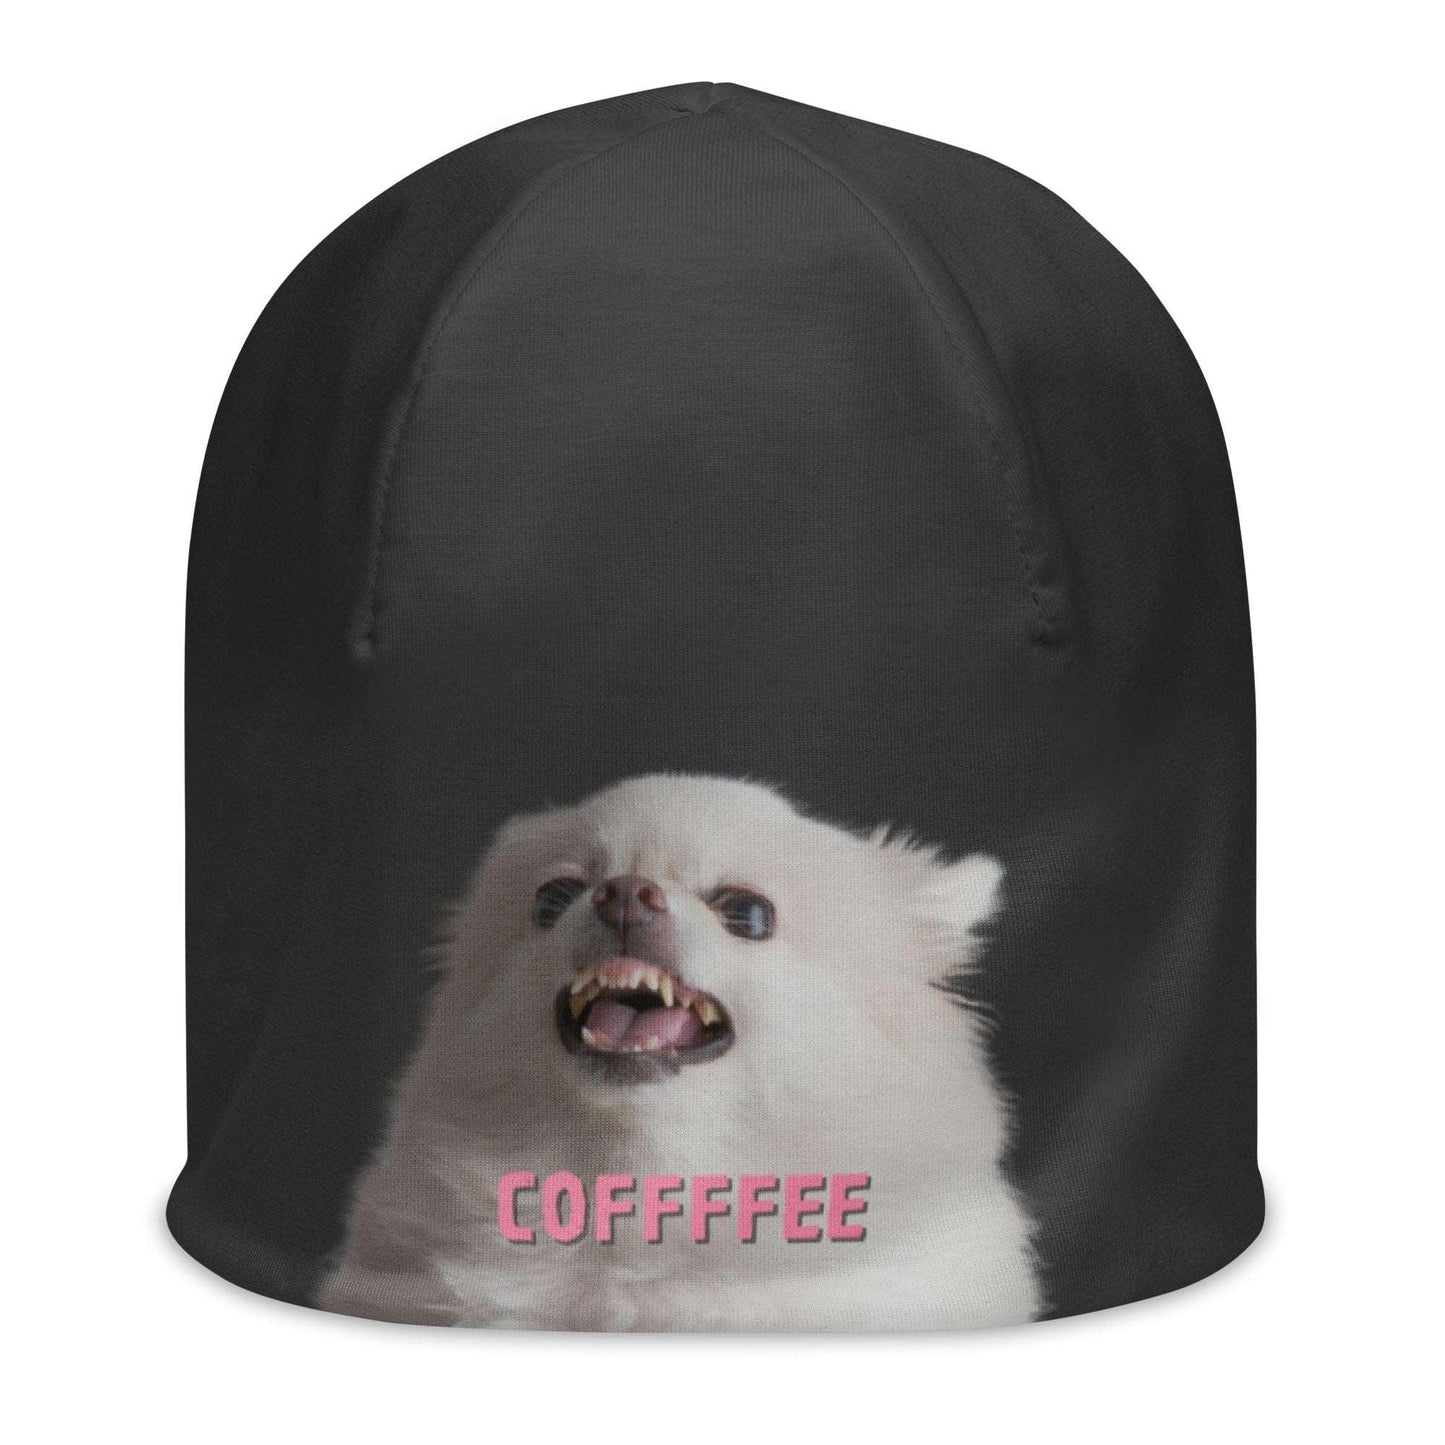 COFFFFEE - one of the famous Chimigos chihuahua memes.  This double-layered, soft and comfy grey beanie features a super fluffy snow white chihuahua who clearly feels tetchy first thing in the morning, and is barking - snapping - their order for coffee. Better shut up and put the kettle on already! A cute gift idea for someone who loves chihuahuas and coffee. Or indeed a warning to everyone to stay clear until you've had your caffeine fix!  A cute coffee meme that will make any girl go AW.